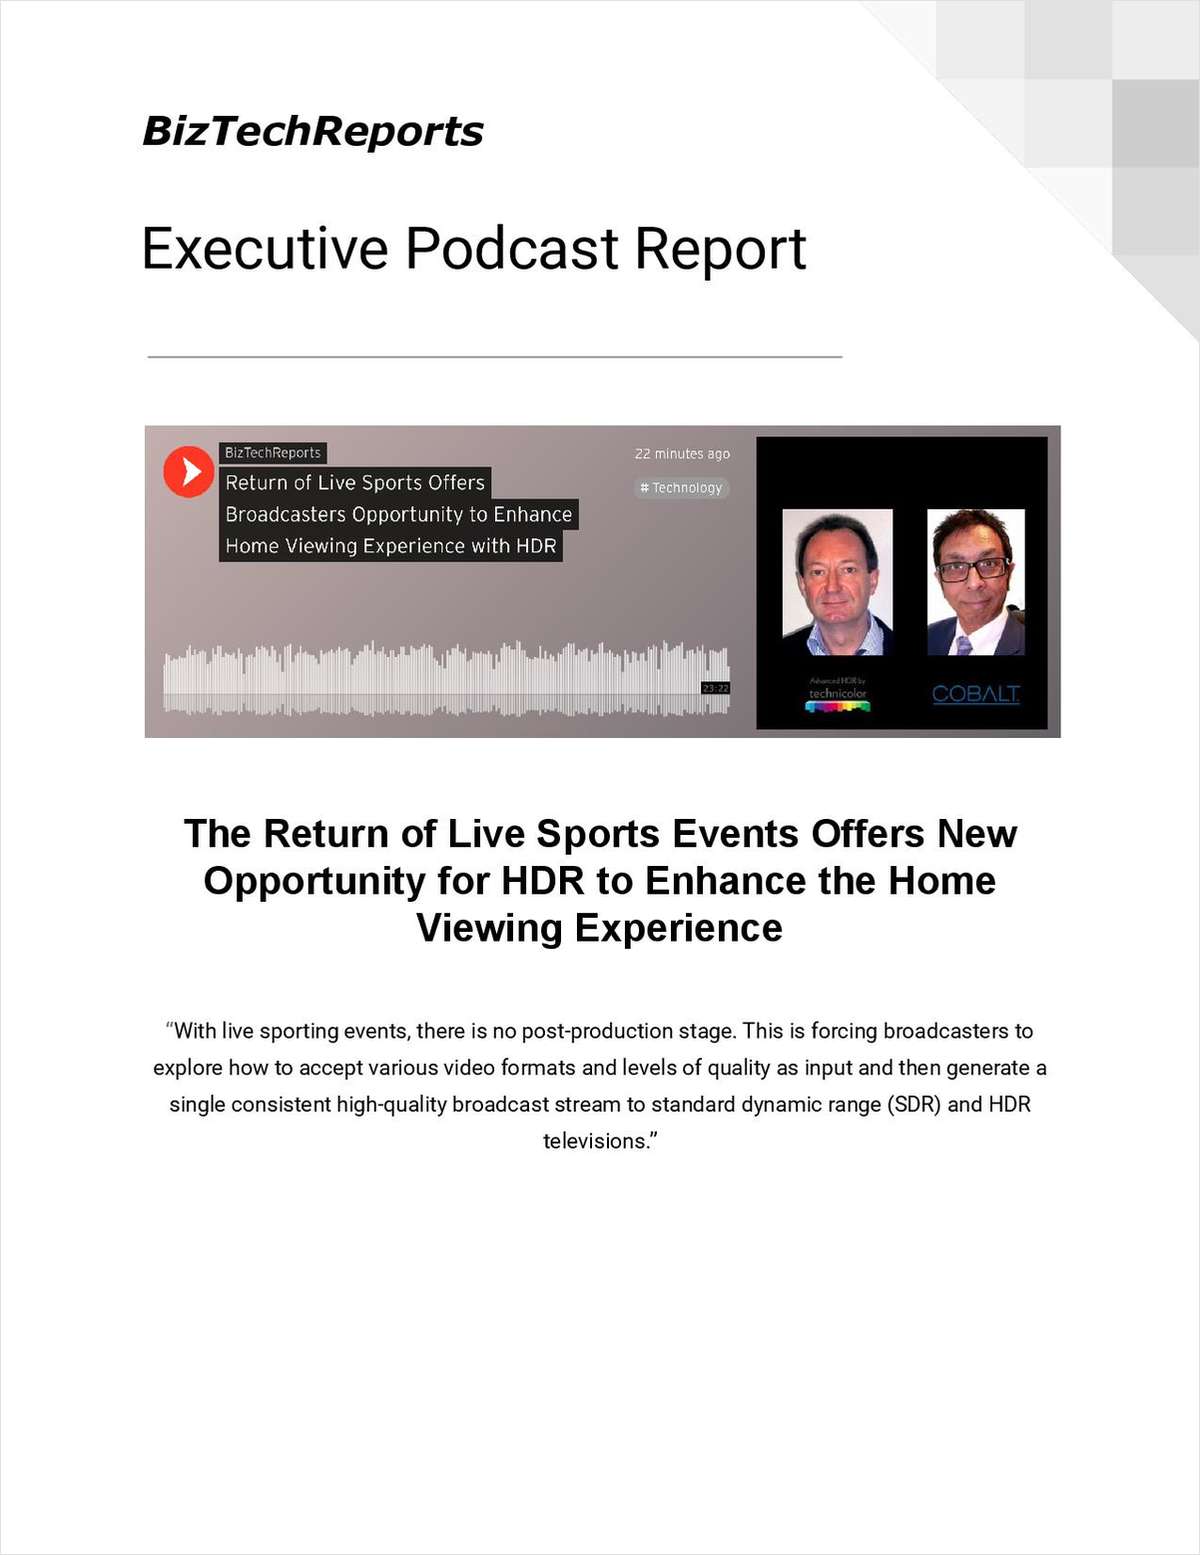 The Return of Live Sports Events Offers New Opportunity for HDR to Enhance the Home Viewing Experience